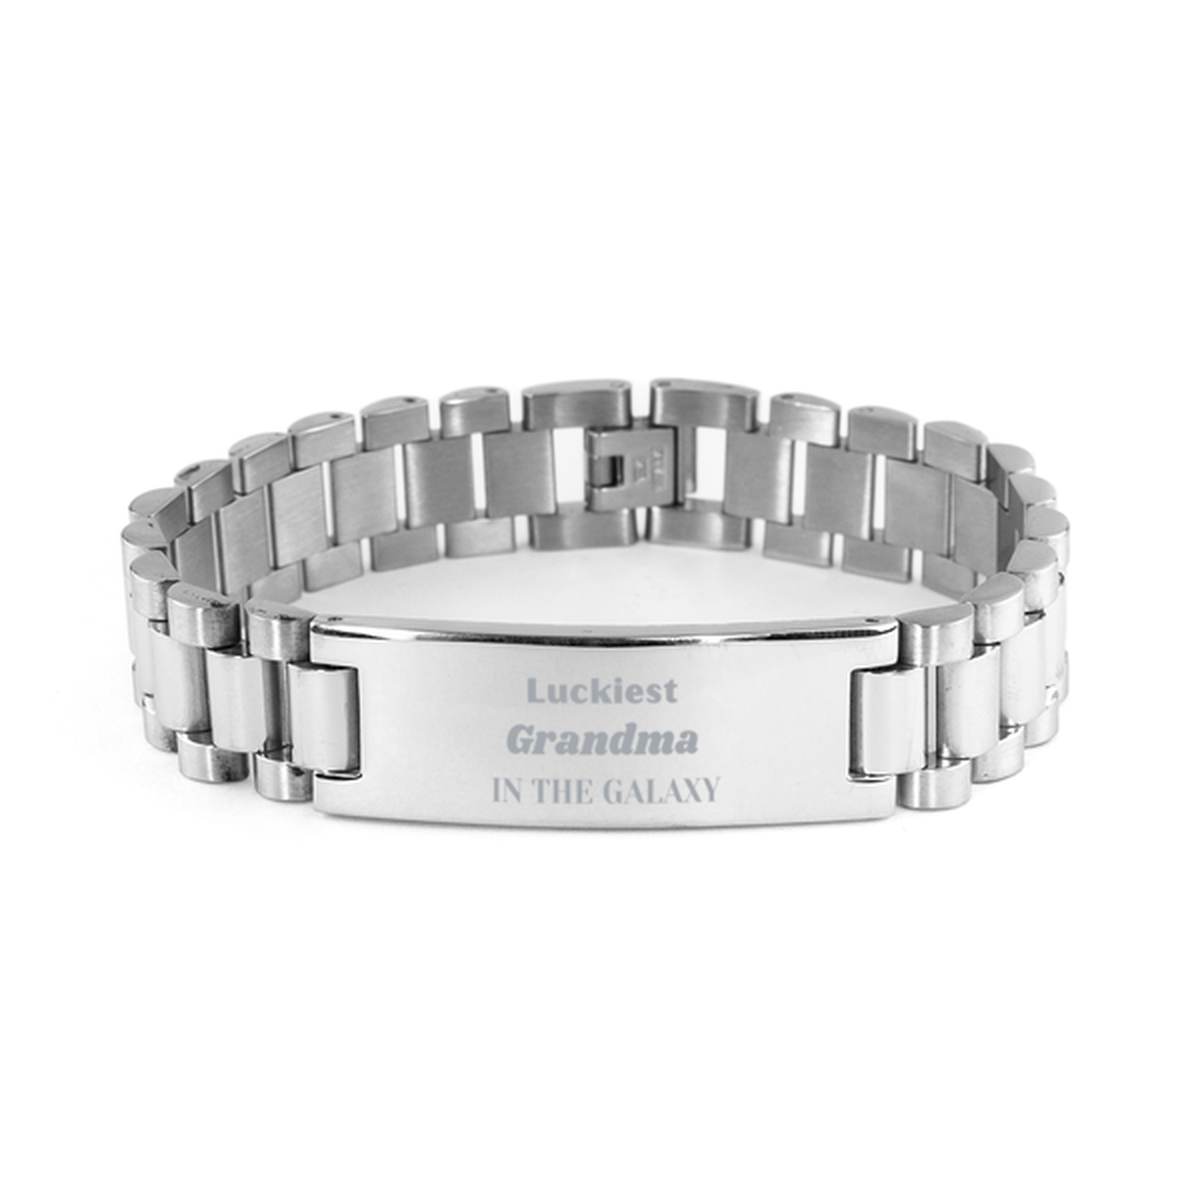 Luckiest Grandma in the Galaxy, To My Grandma Engraved Gifts, Christmas Grandma Ladder Stainless Steel Bracelet Gifts, X-mas Birthday Unique Gifts For Grandma Men Women